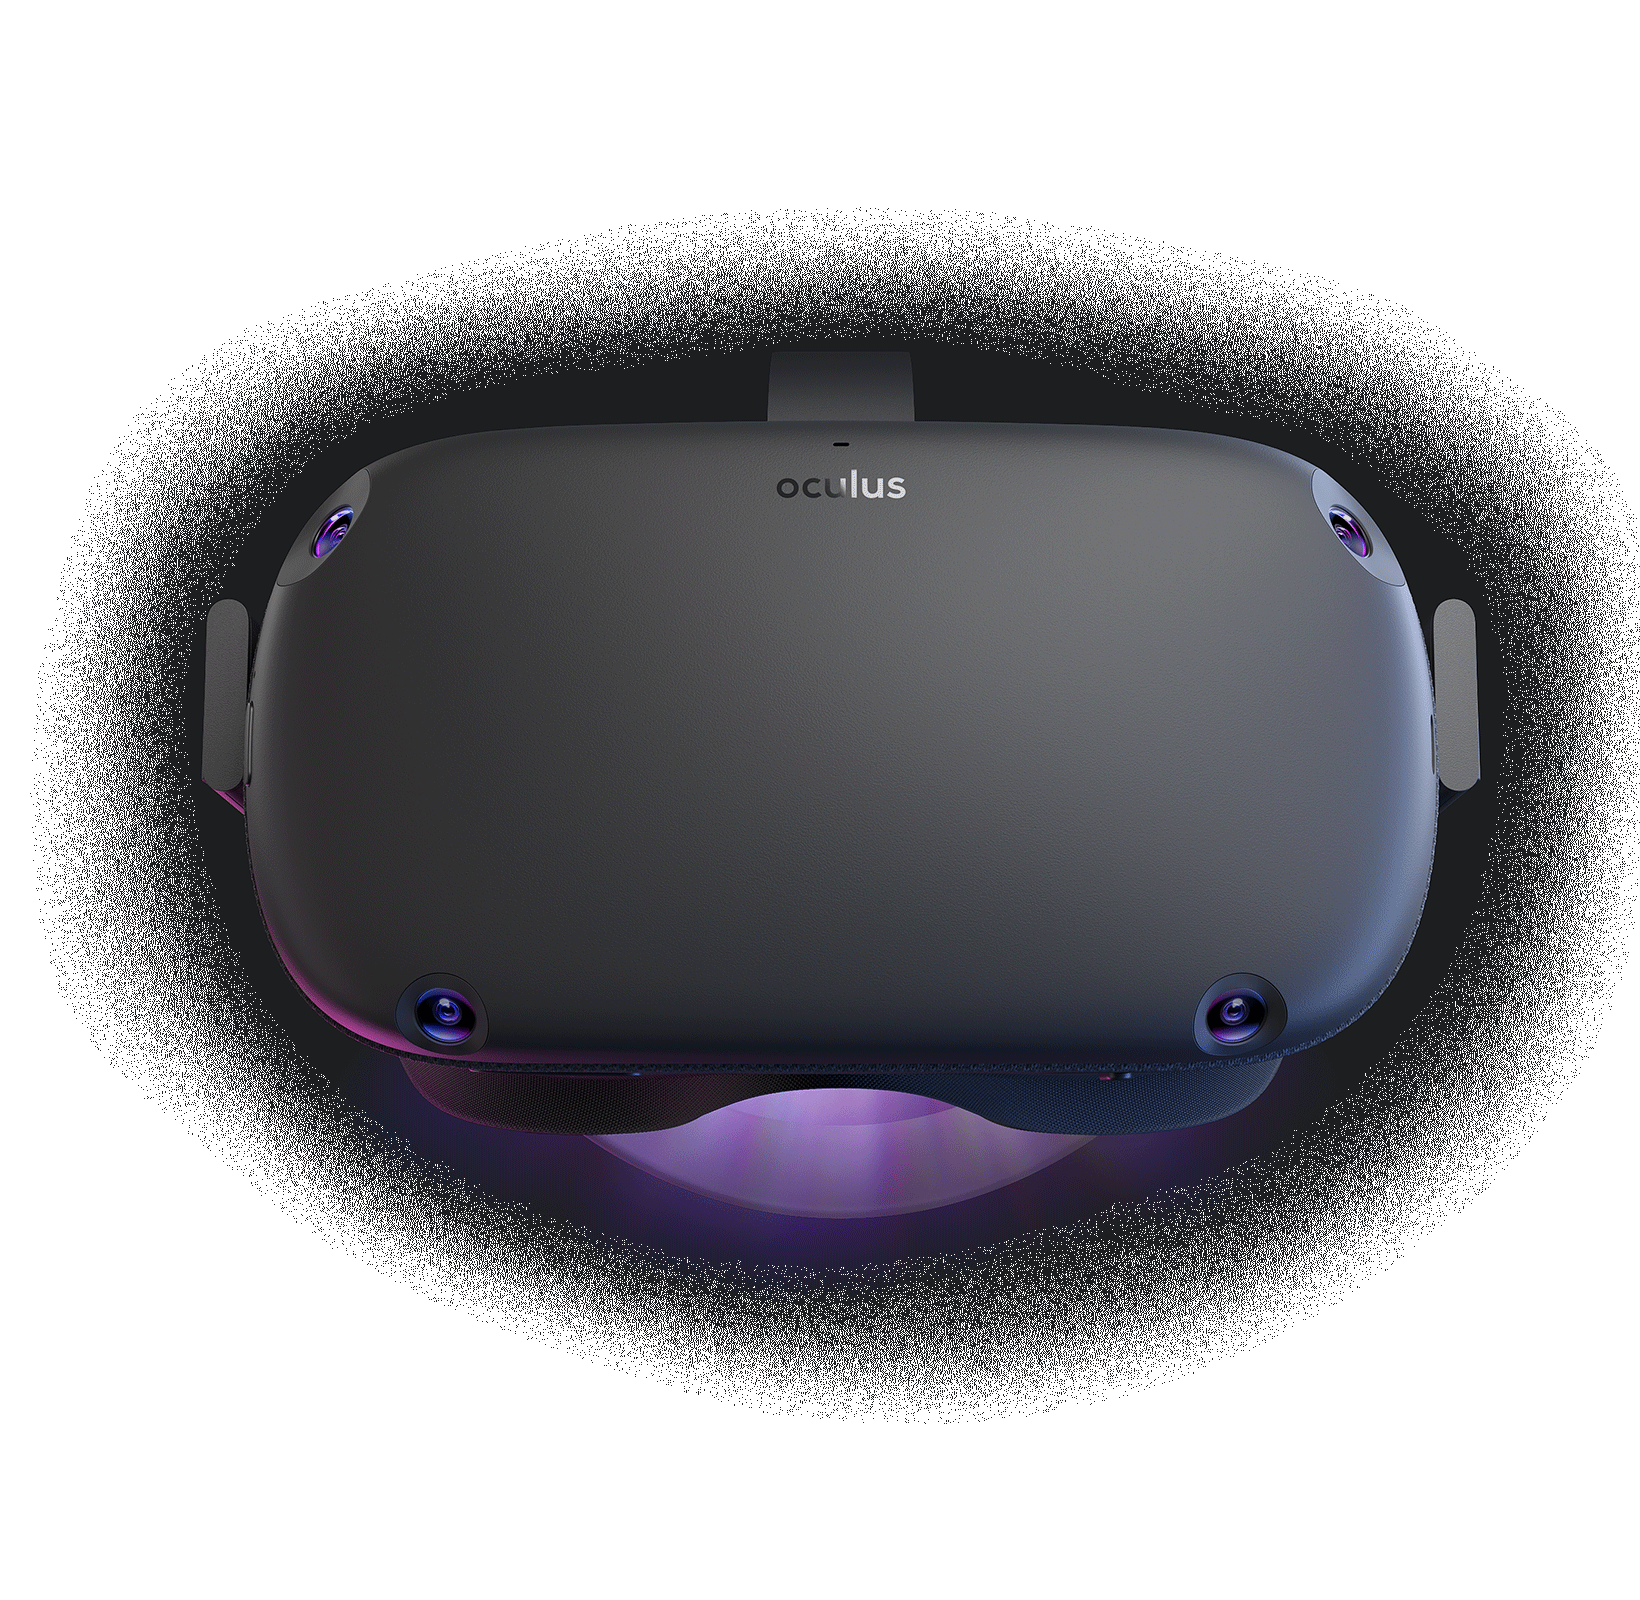 Oculus Quest now available, starts at 399 for a 64GB set